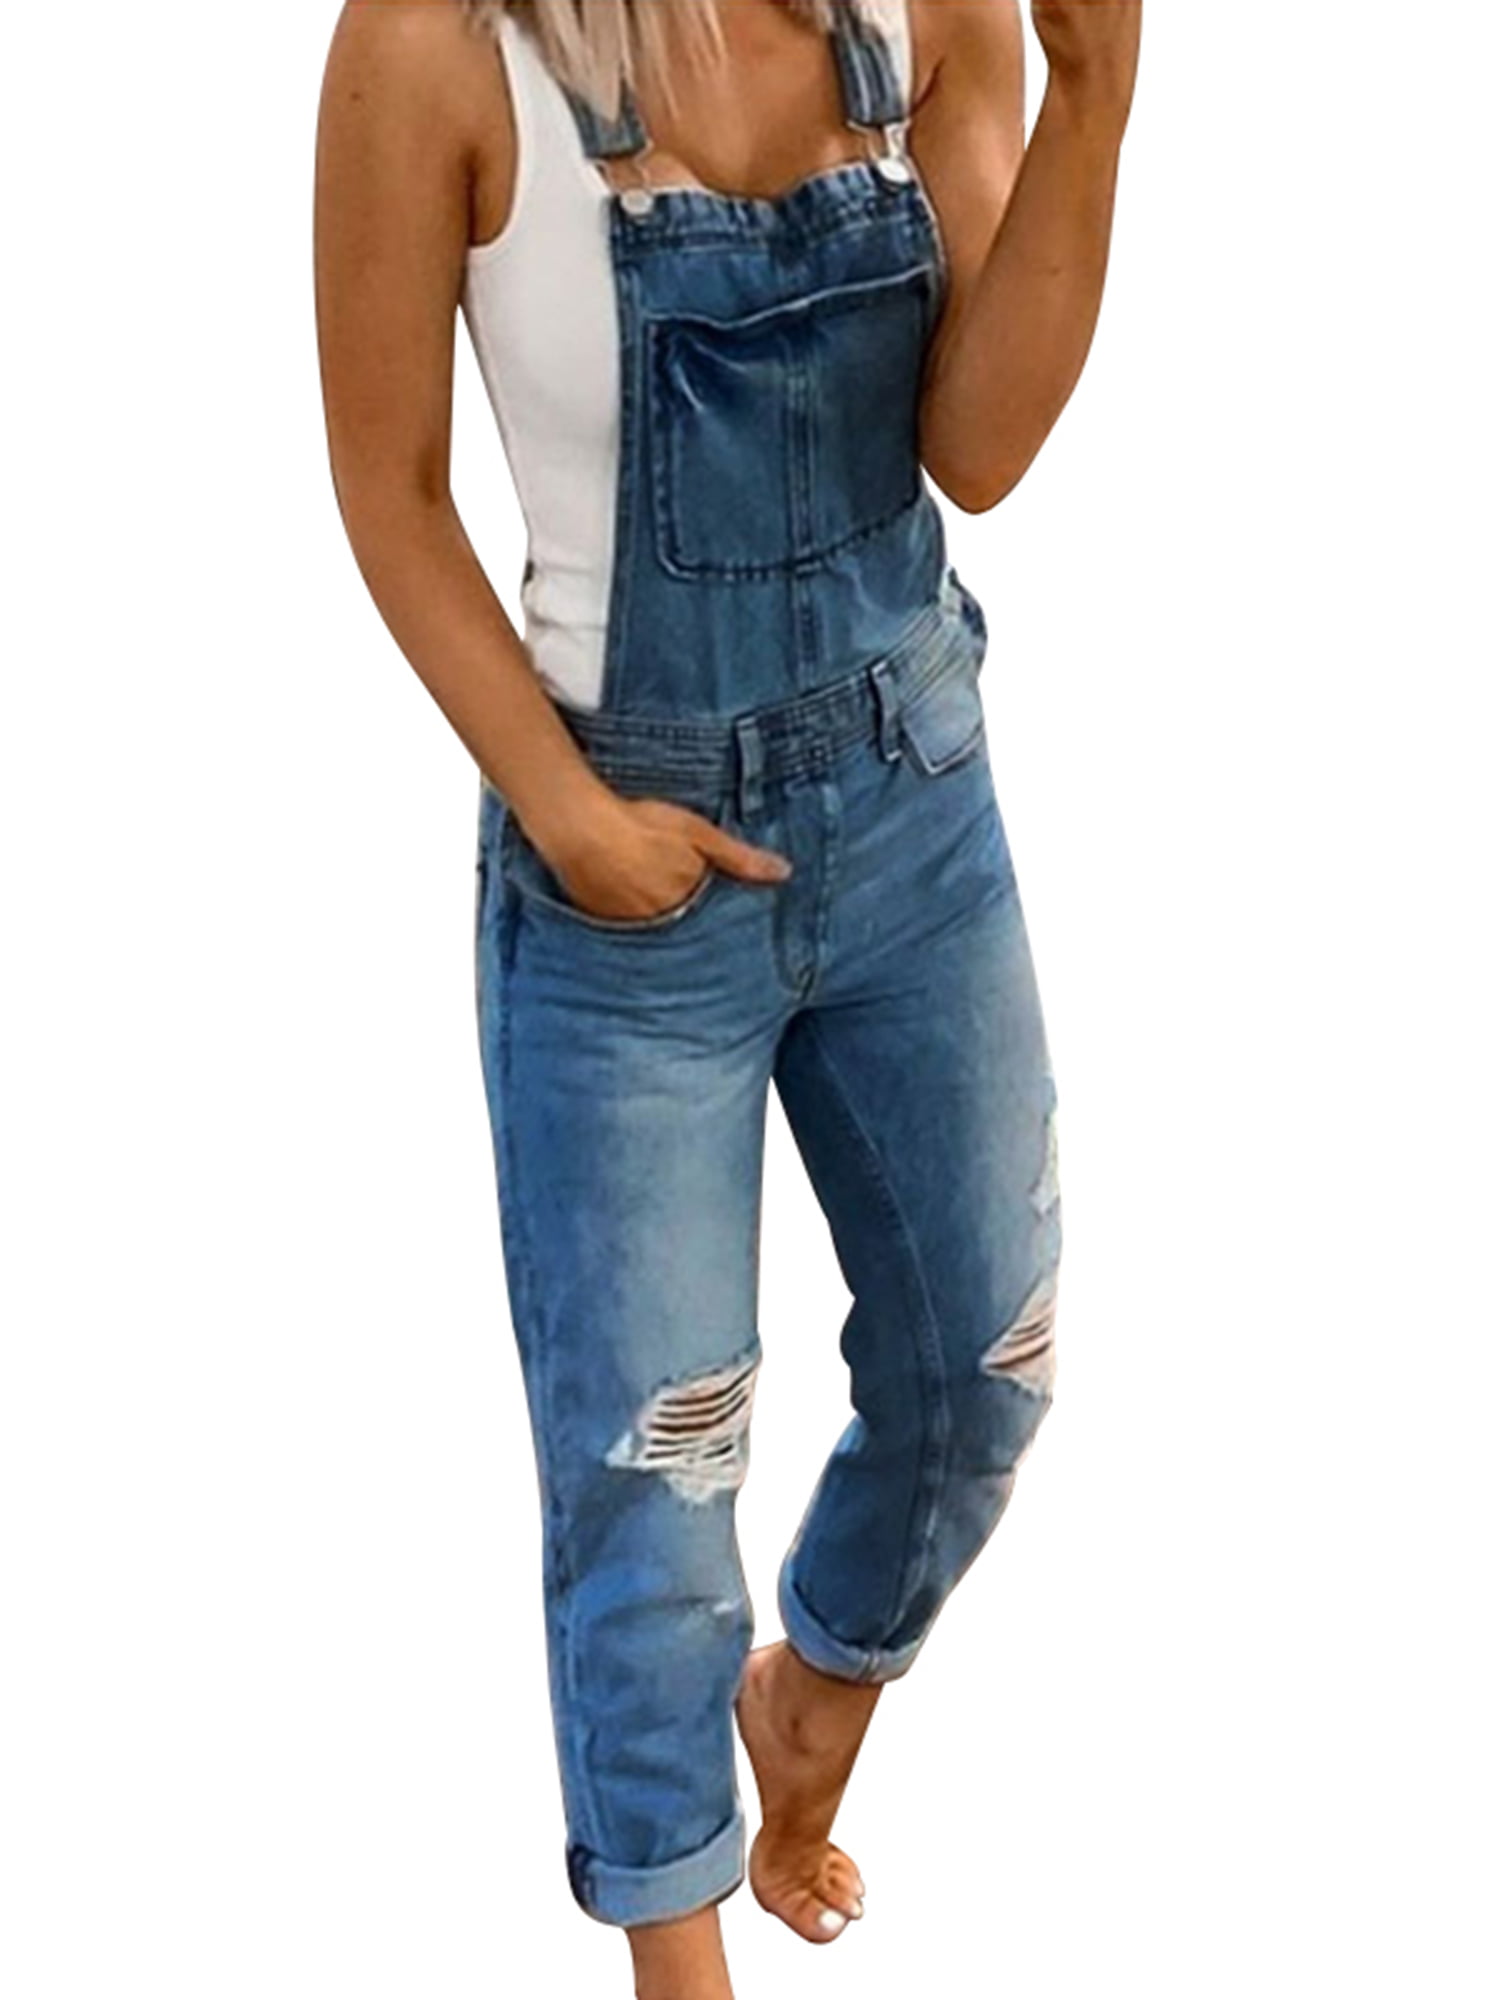 Womens High Waisted Denim Flare Pants Plus Size Slim Butt Lift Bell Bottom Ripped Stretchy Jeans Pants Distressed Adjustable Strap Bib Overalls 